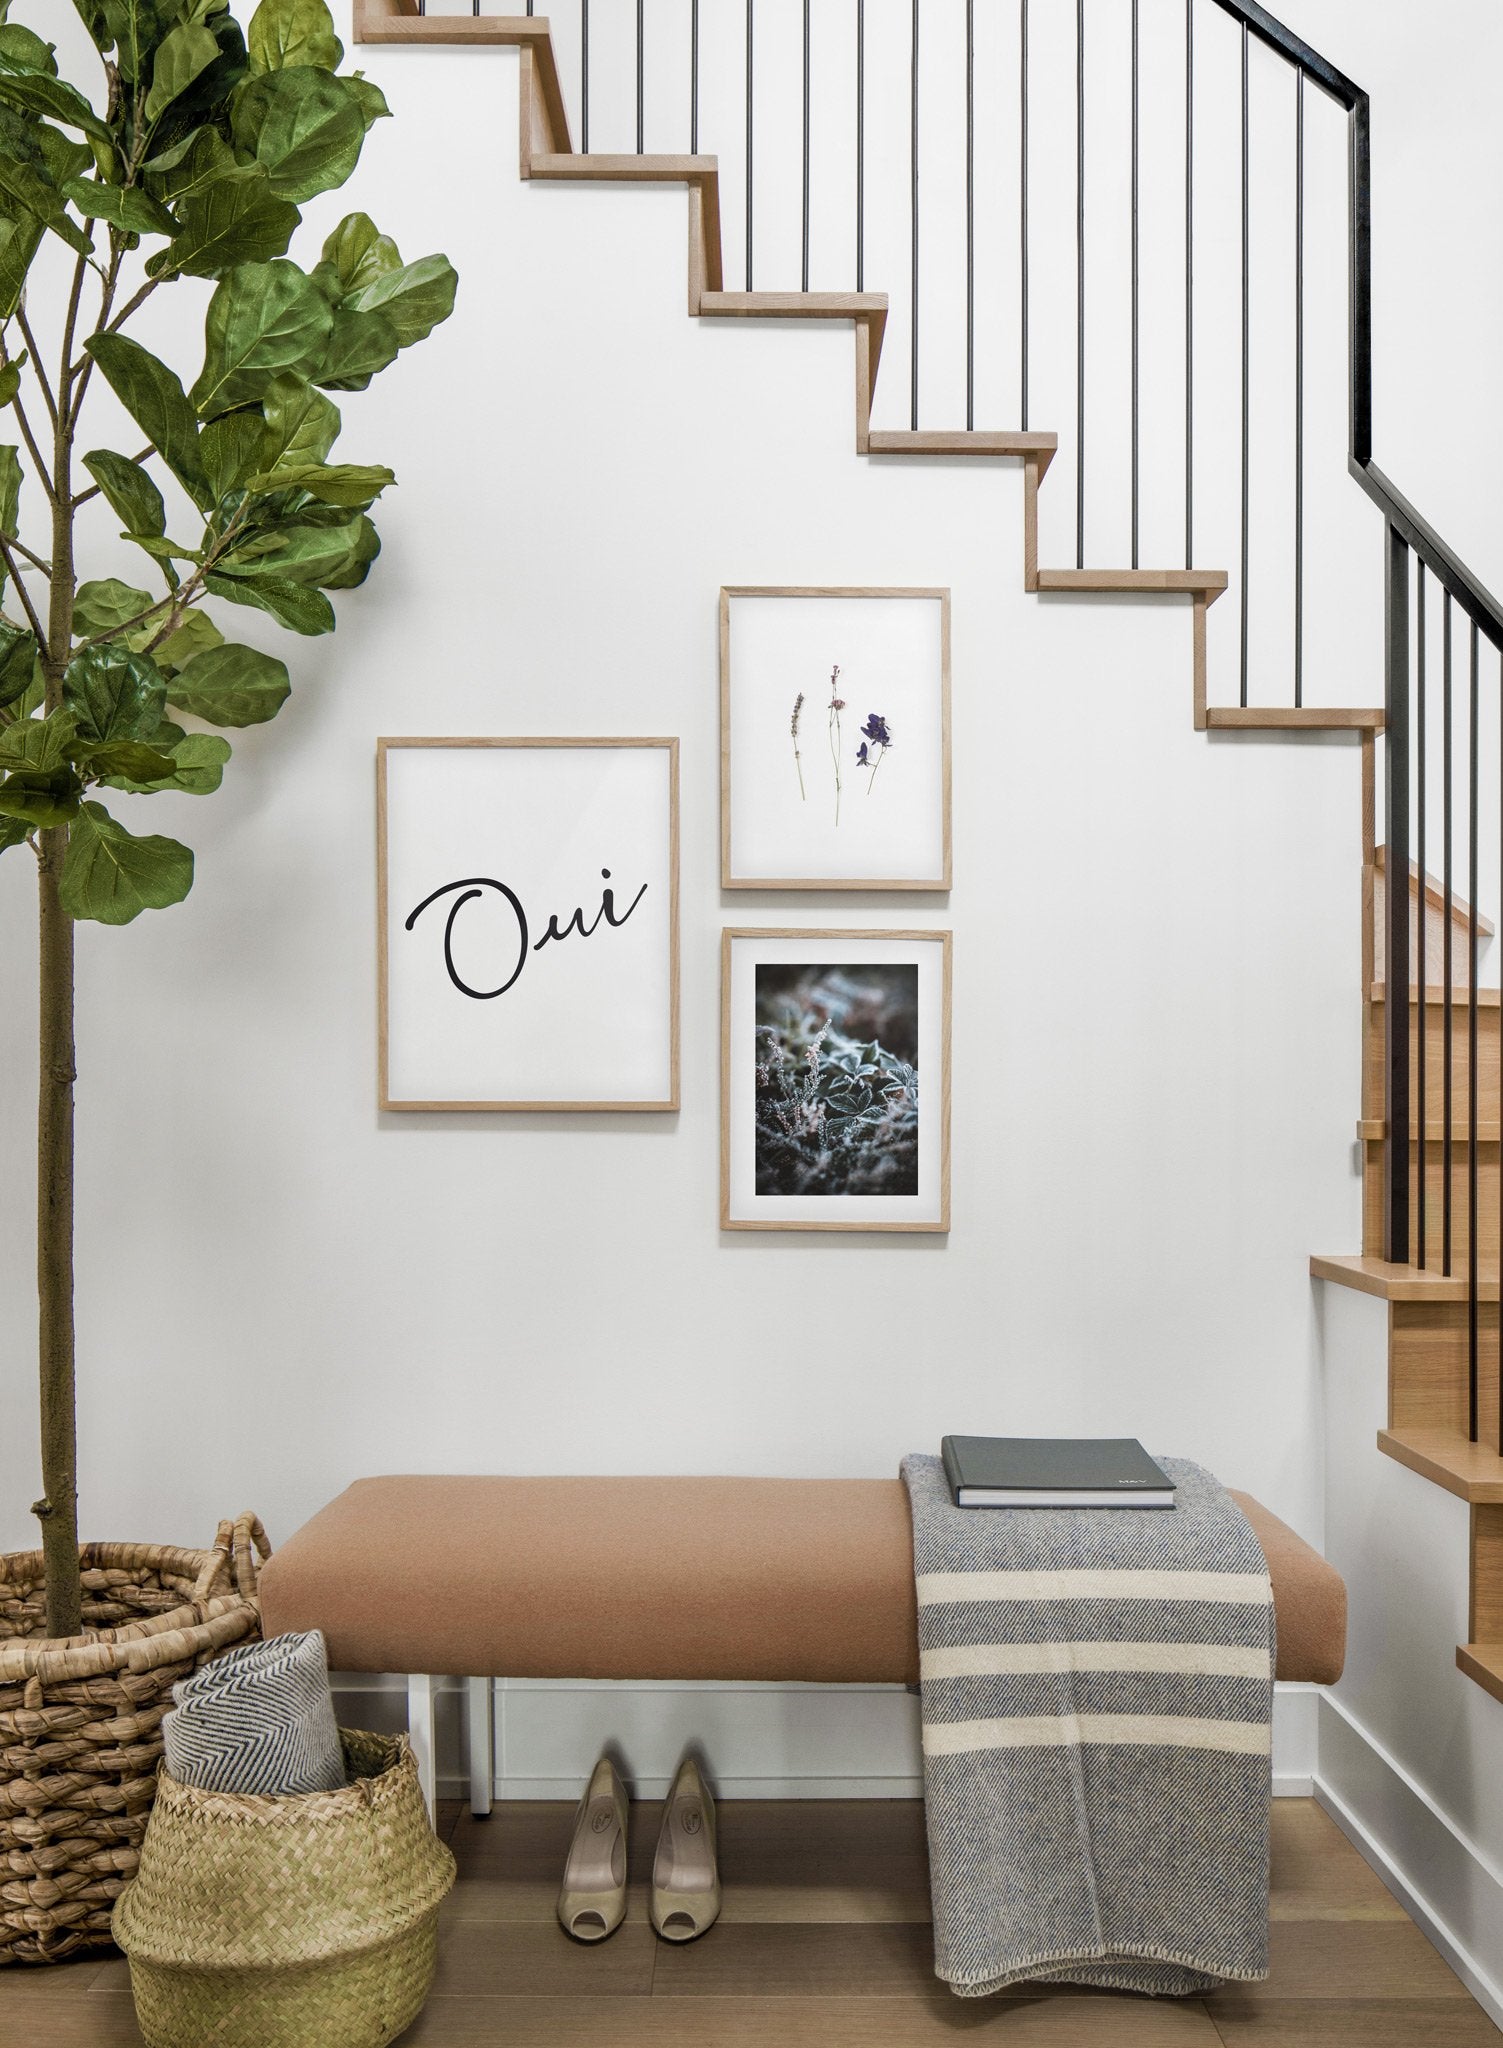 Scandinavian poster by Opposite Wall with black and white graphic typography design of Oui - Hallway with gallery wall trio